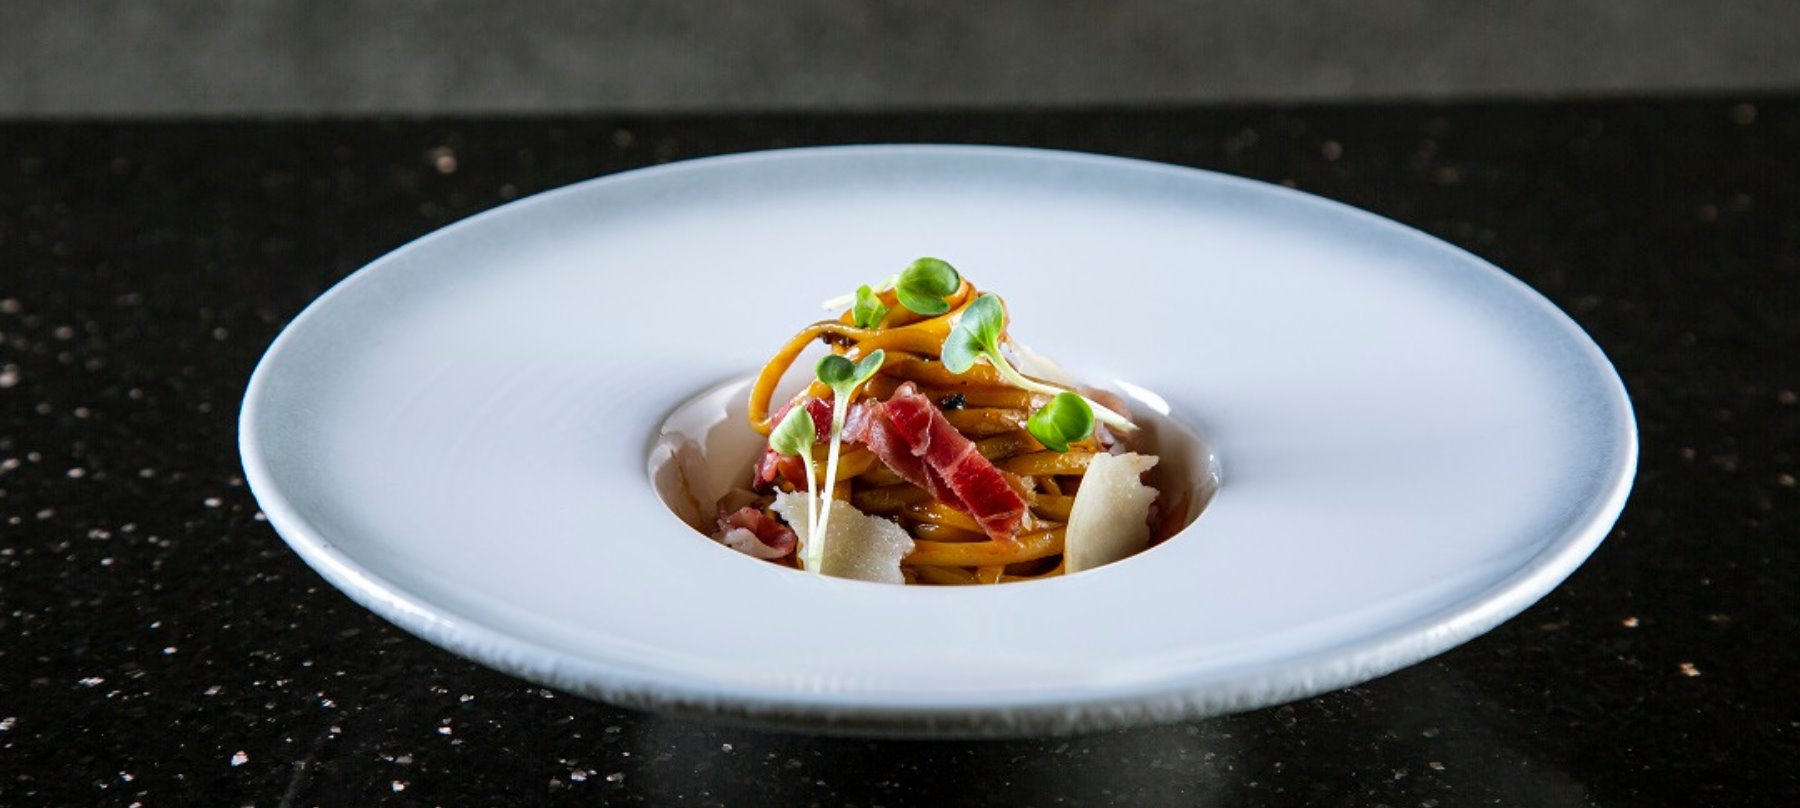 French Grill is a top-tier fine dining spot in Hanoi, proudly holding a prestigious Michelin star